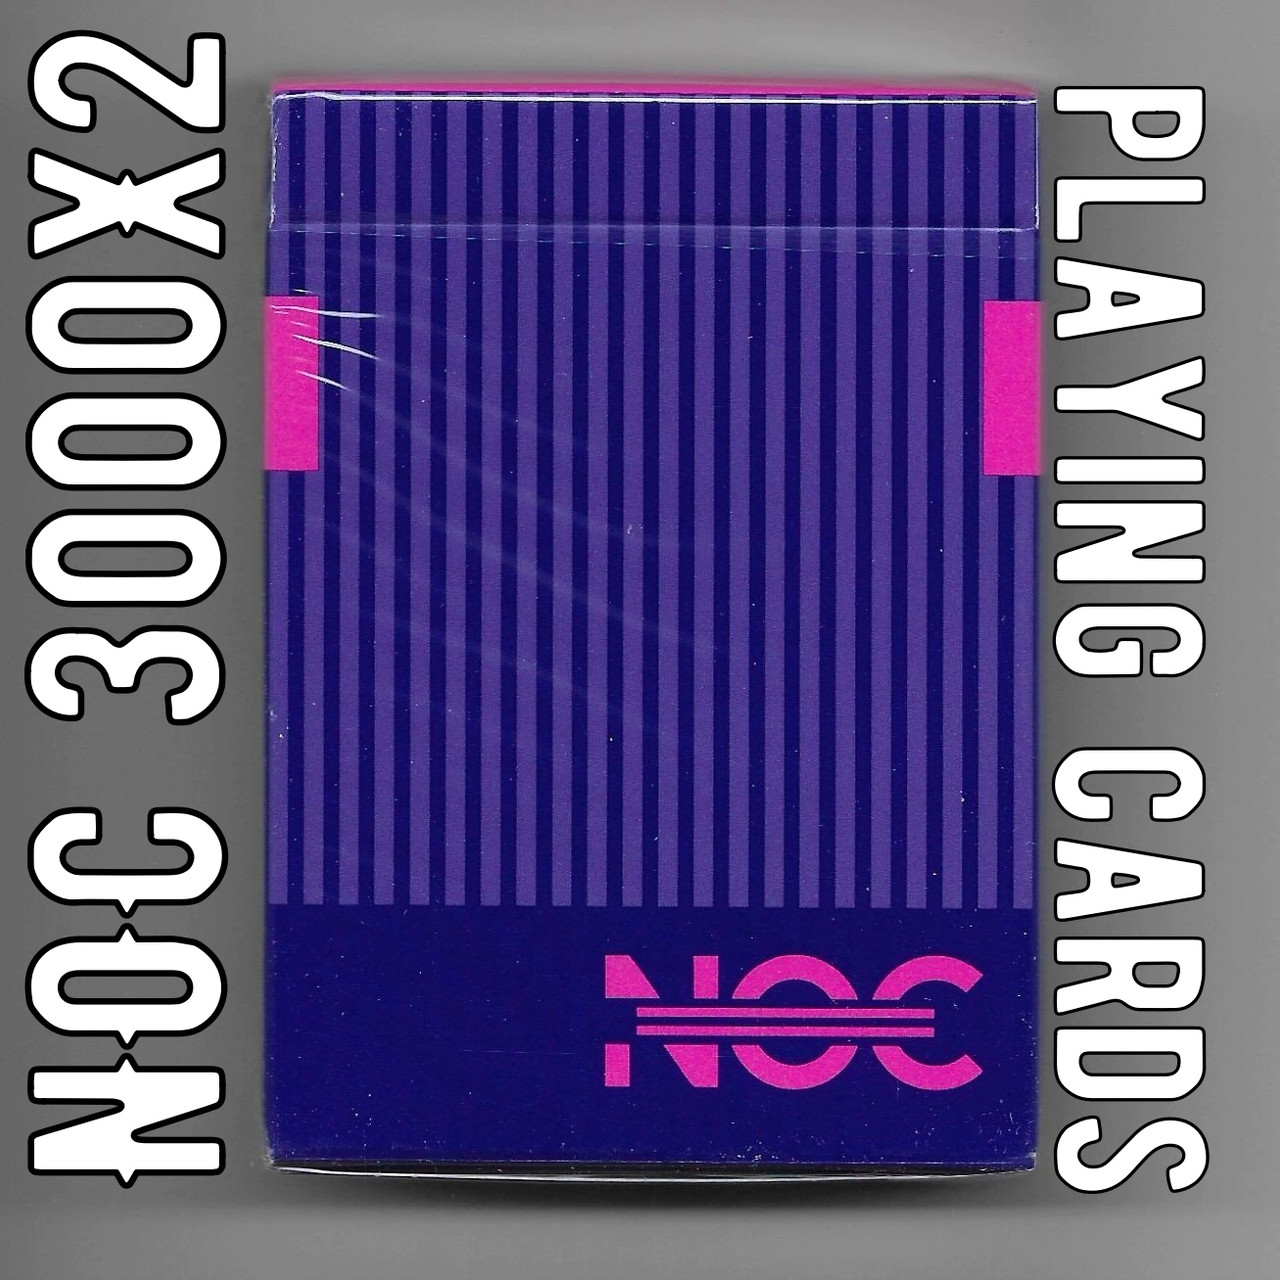 NOC 3000X2 playing cards